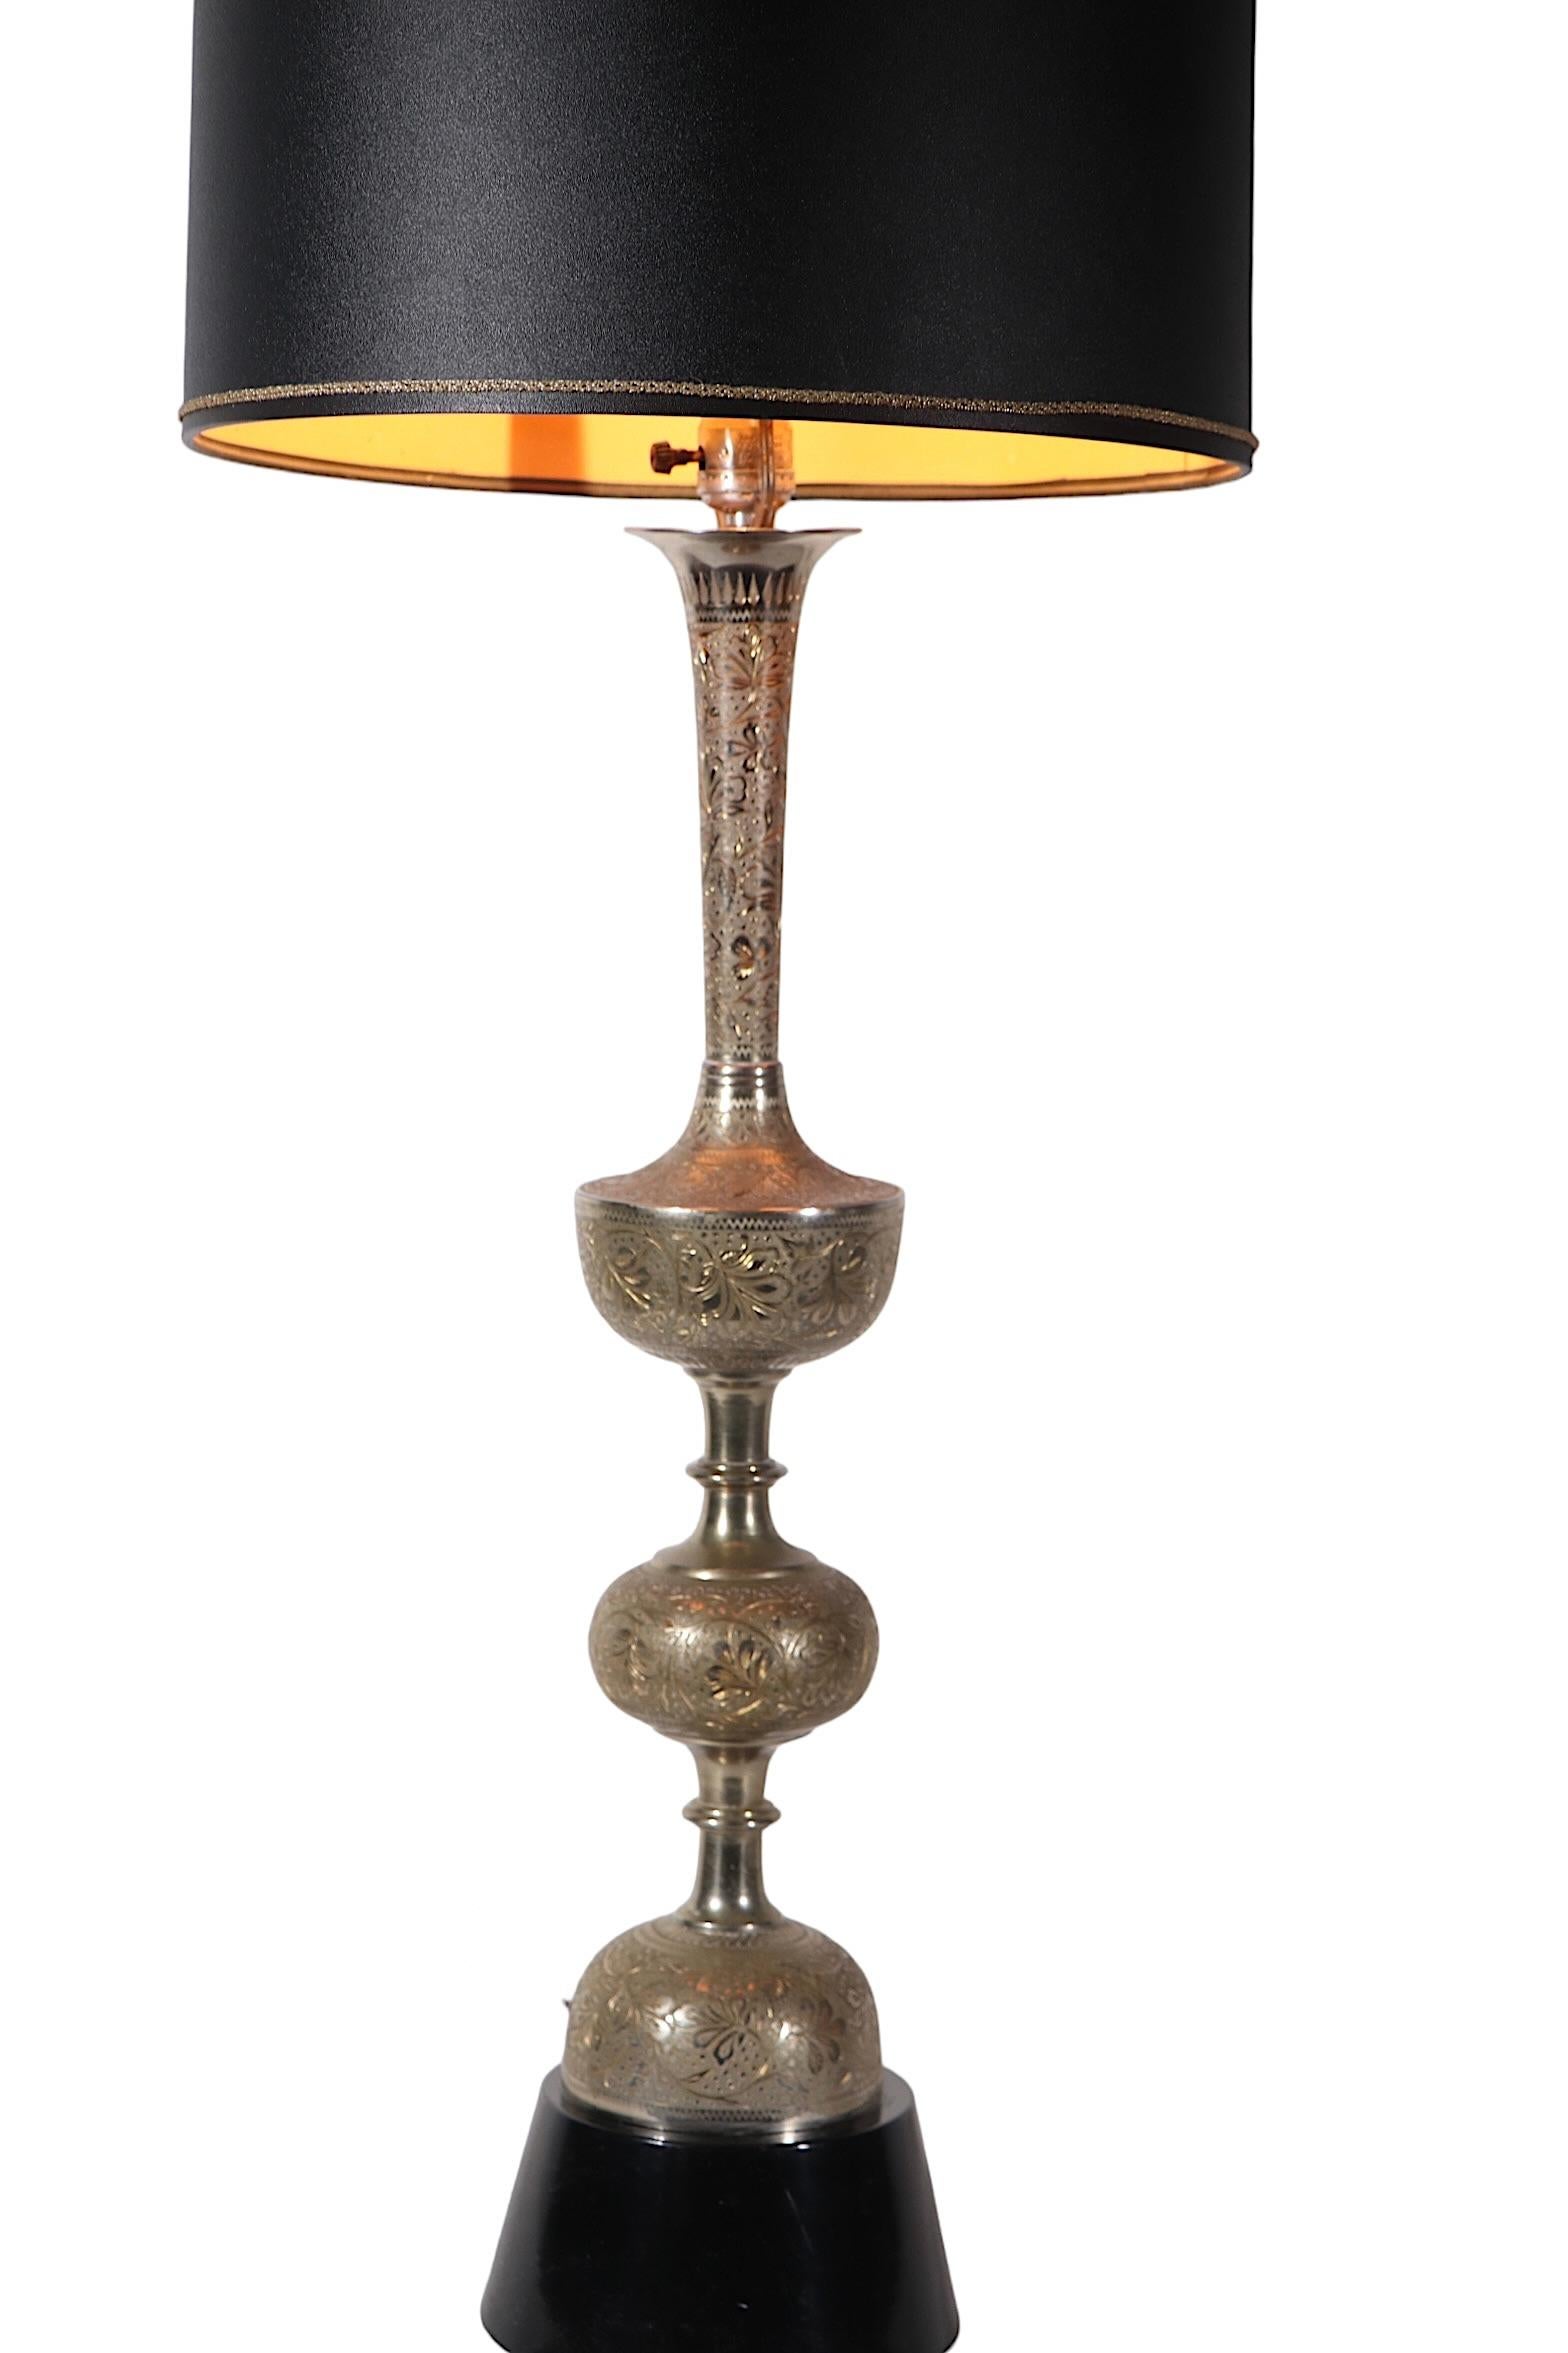  Large Vintage Table Lamp with Chased Silver Finish c. 1970's  For Sale 10